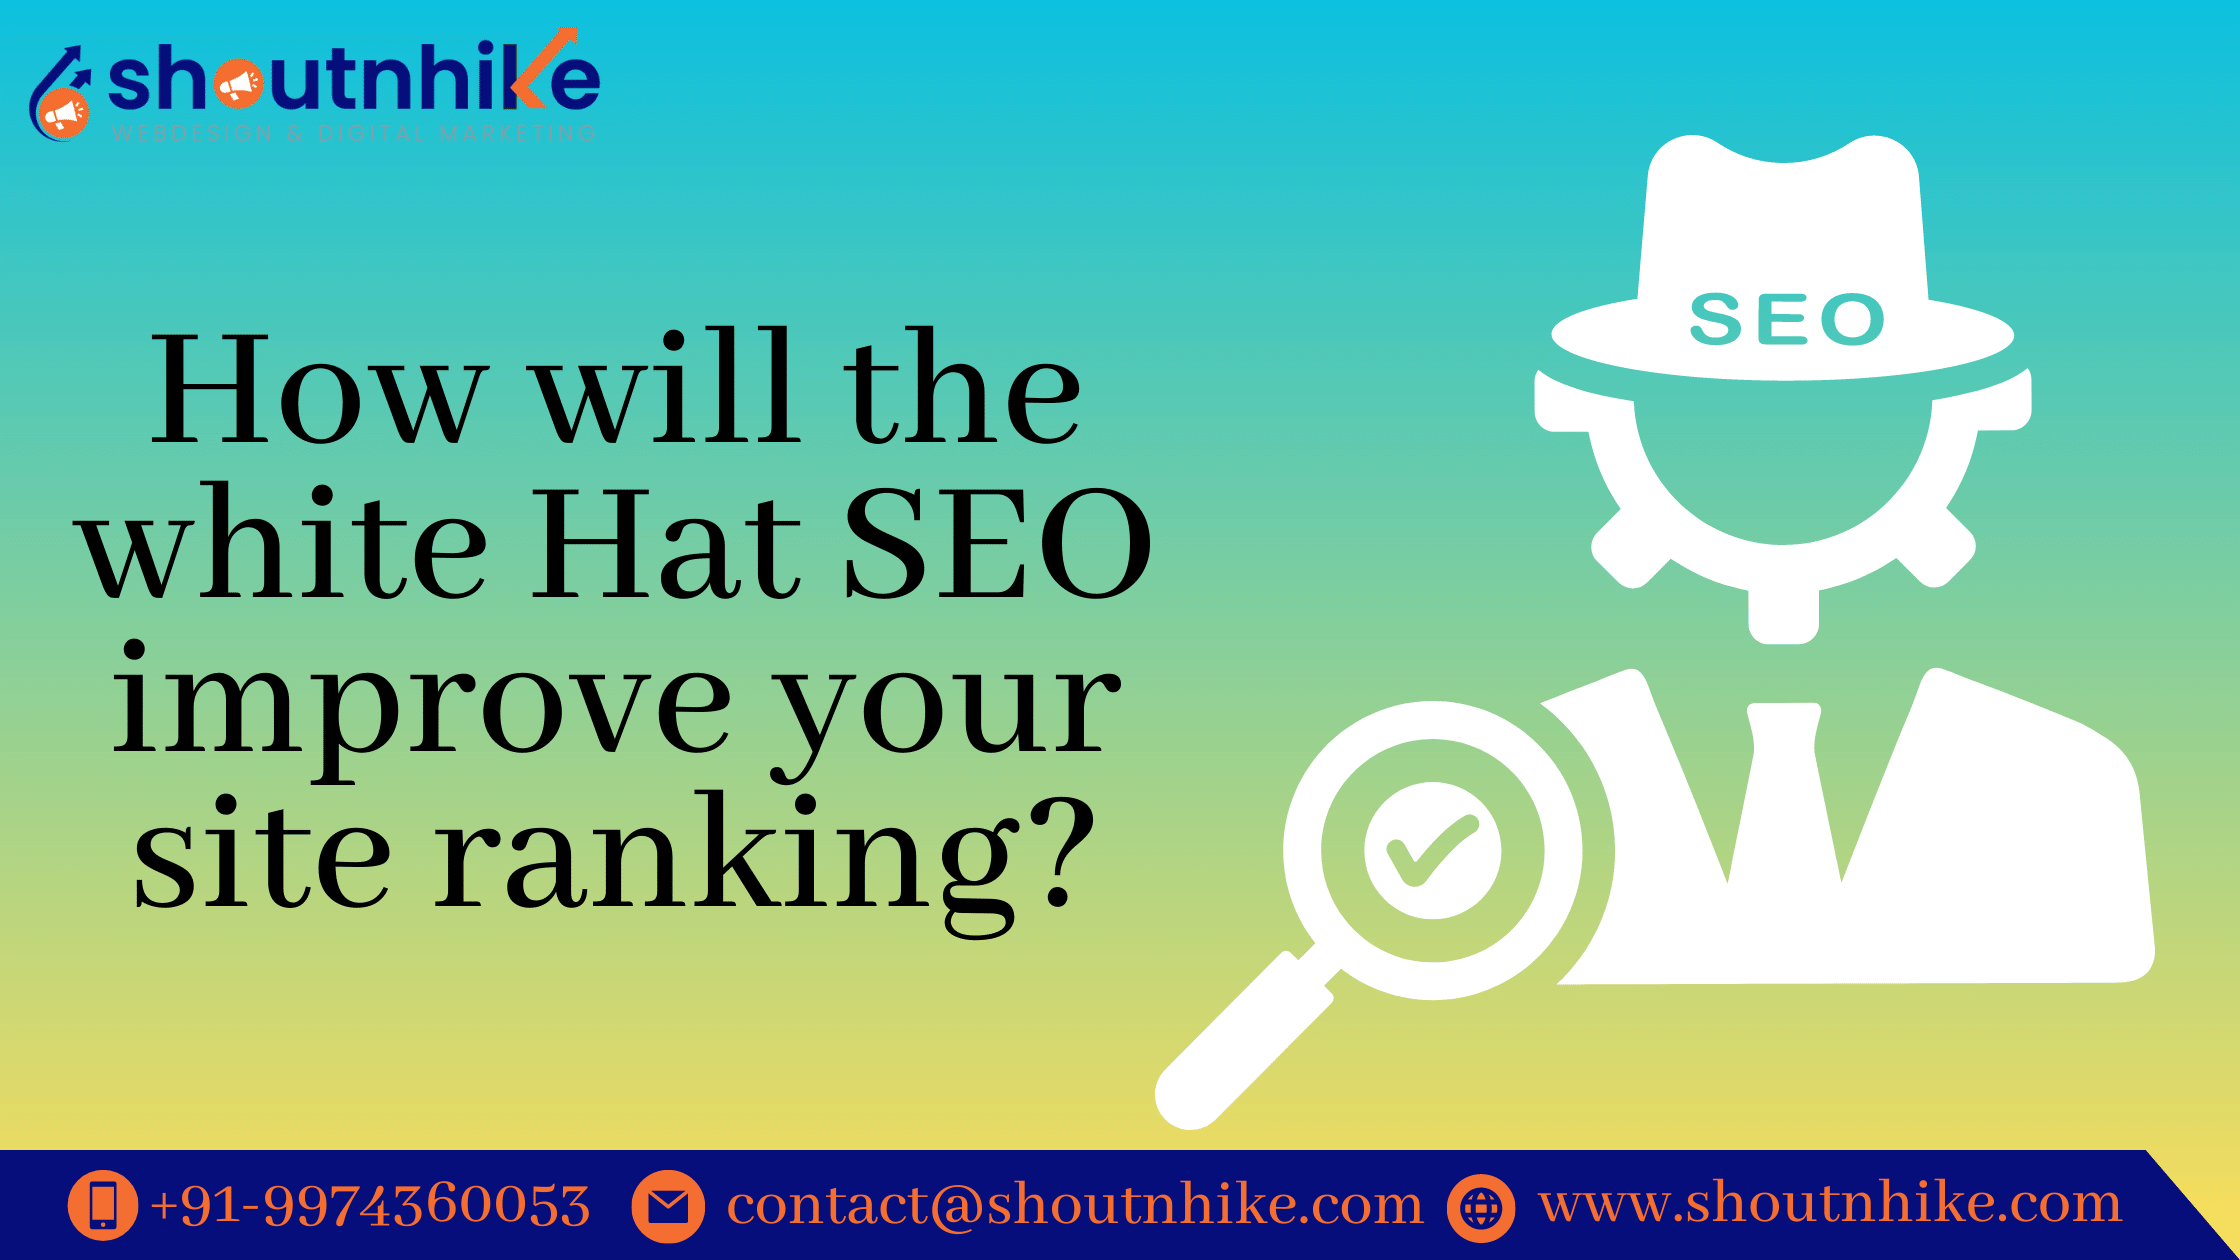 How will the white Hat SEO improve your site ranking?